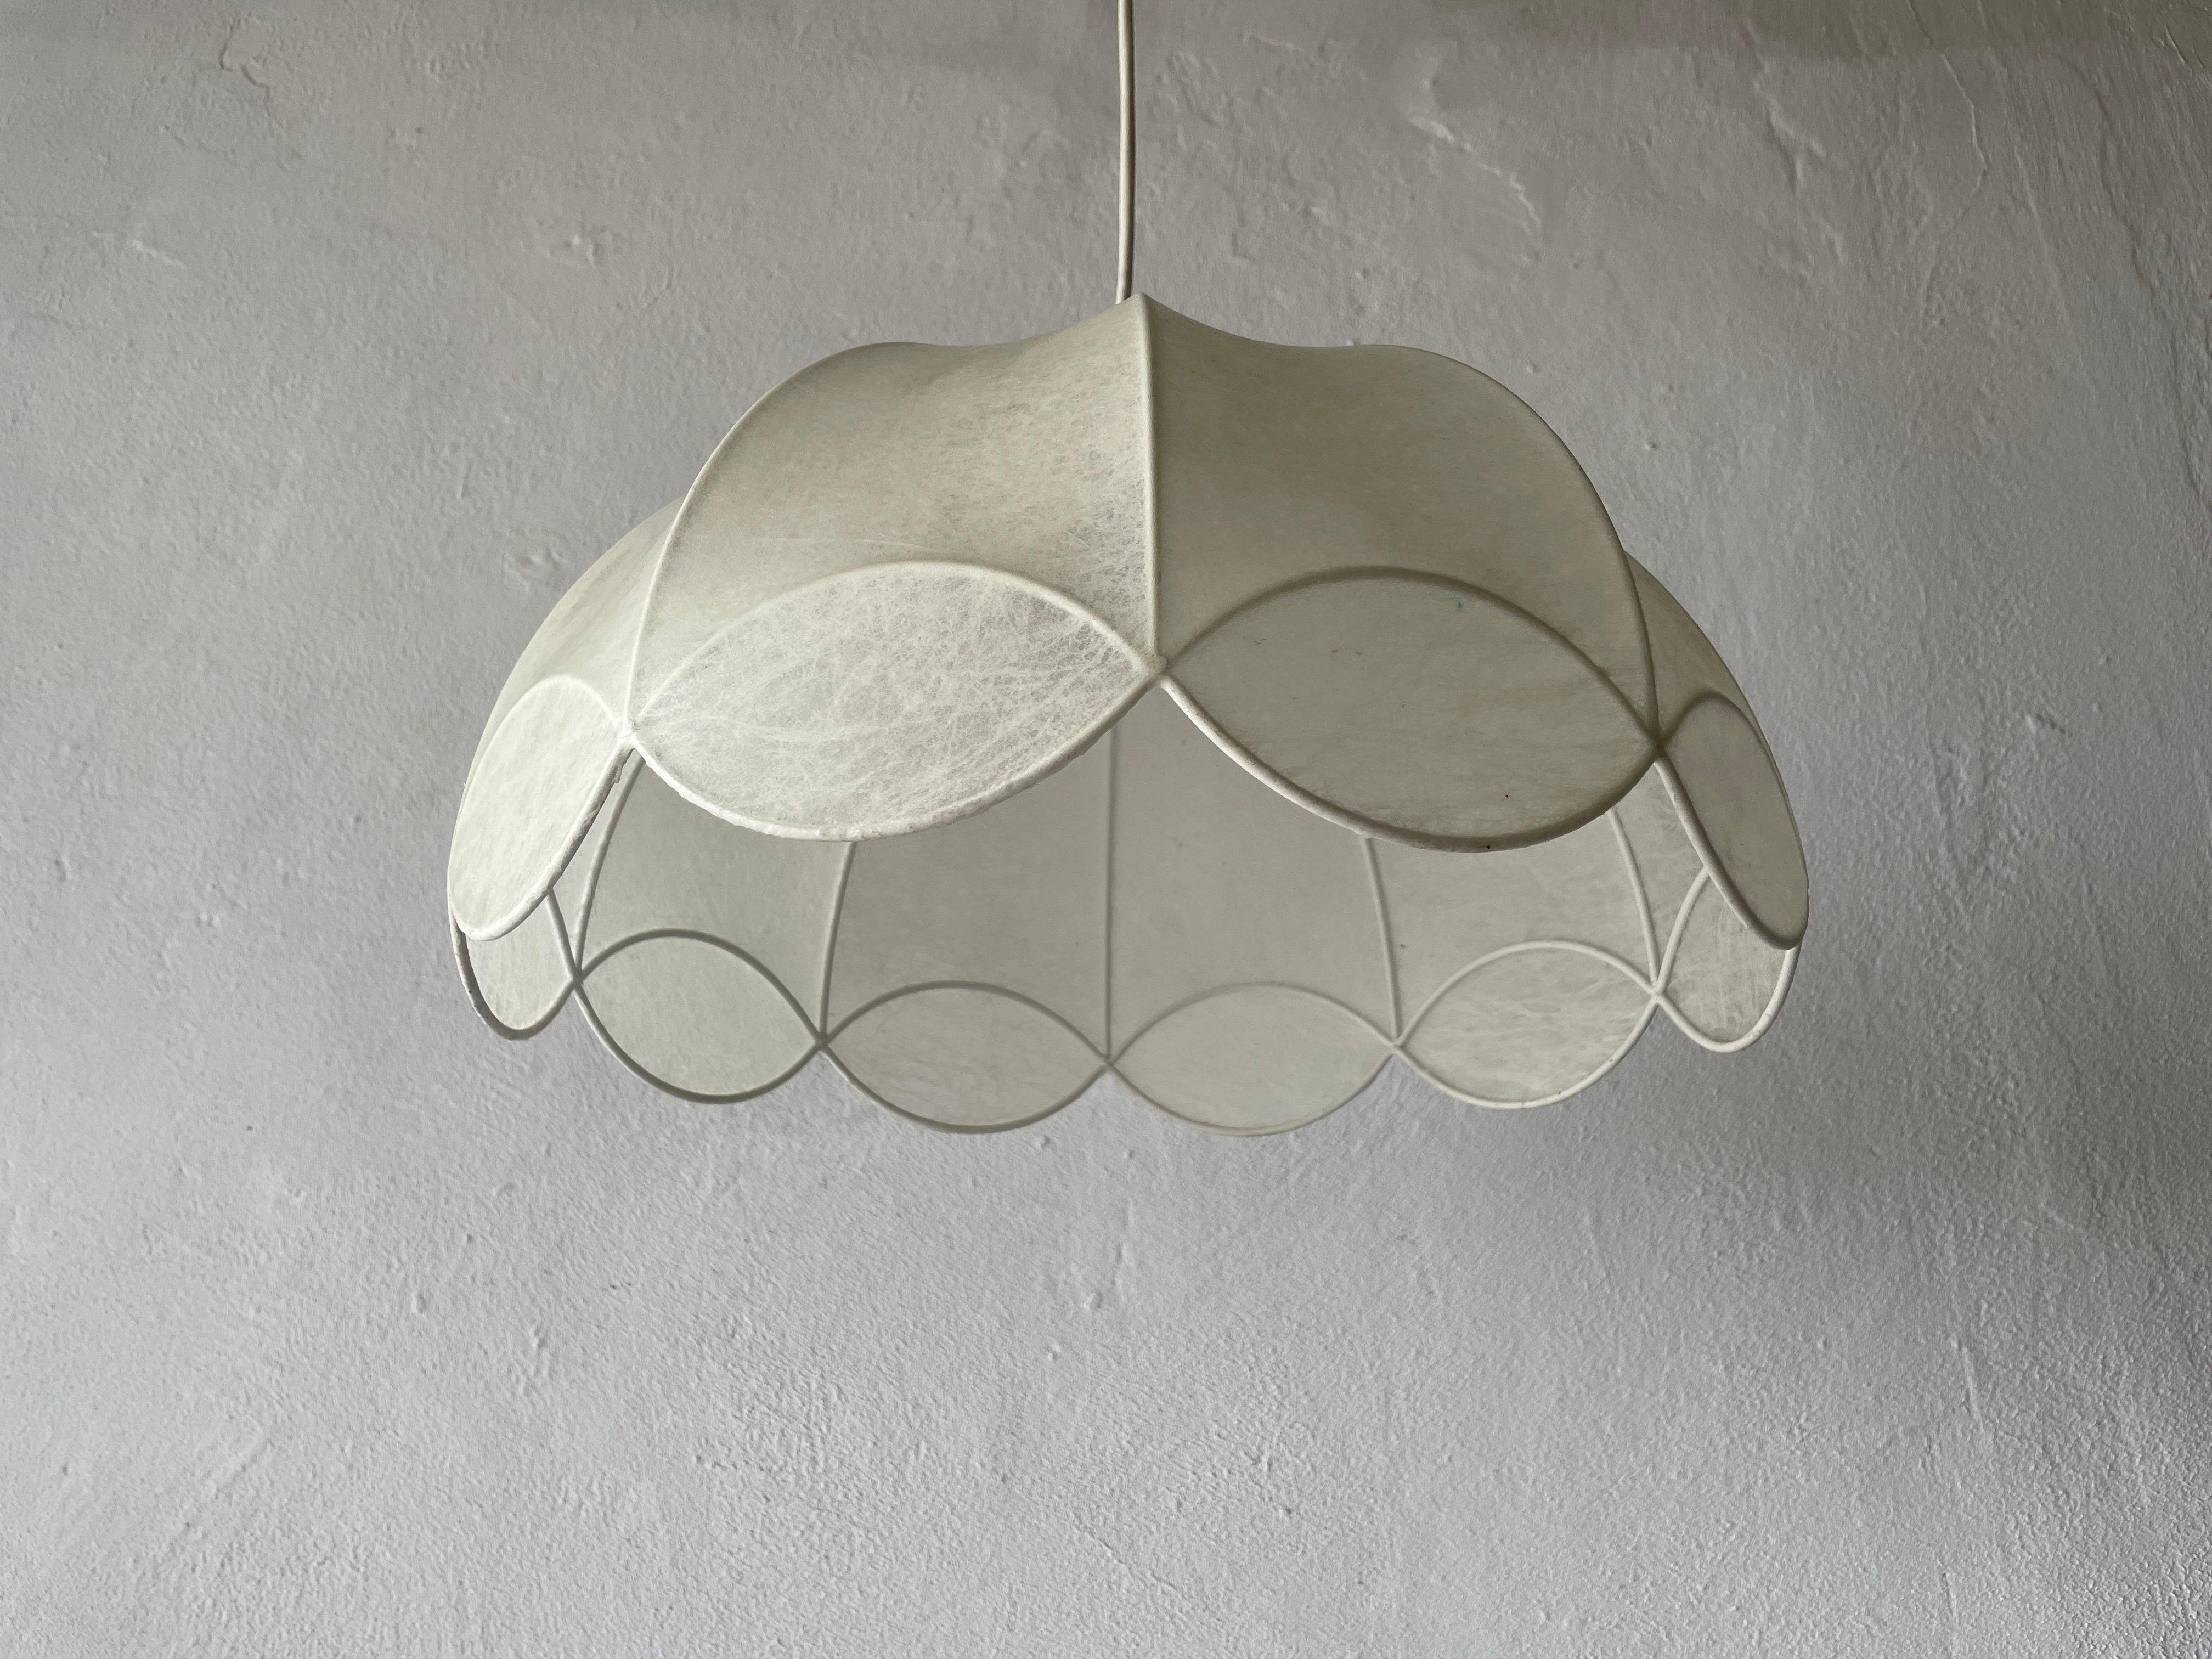 Cocoon pendant lamp by Goldkant, 1960s, Germany


Lampshade is in very good vintage condition.

This lamp works with E27 light bulbs. 
Wired and suitable to use with 220V and 110V for all countries.

Measurements:
Height: 84 cm
Lampshade